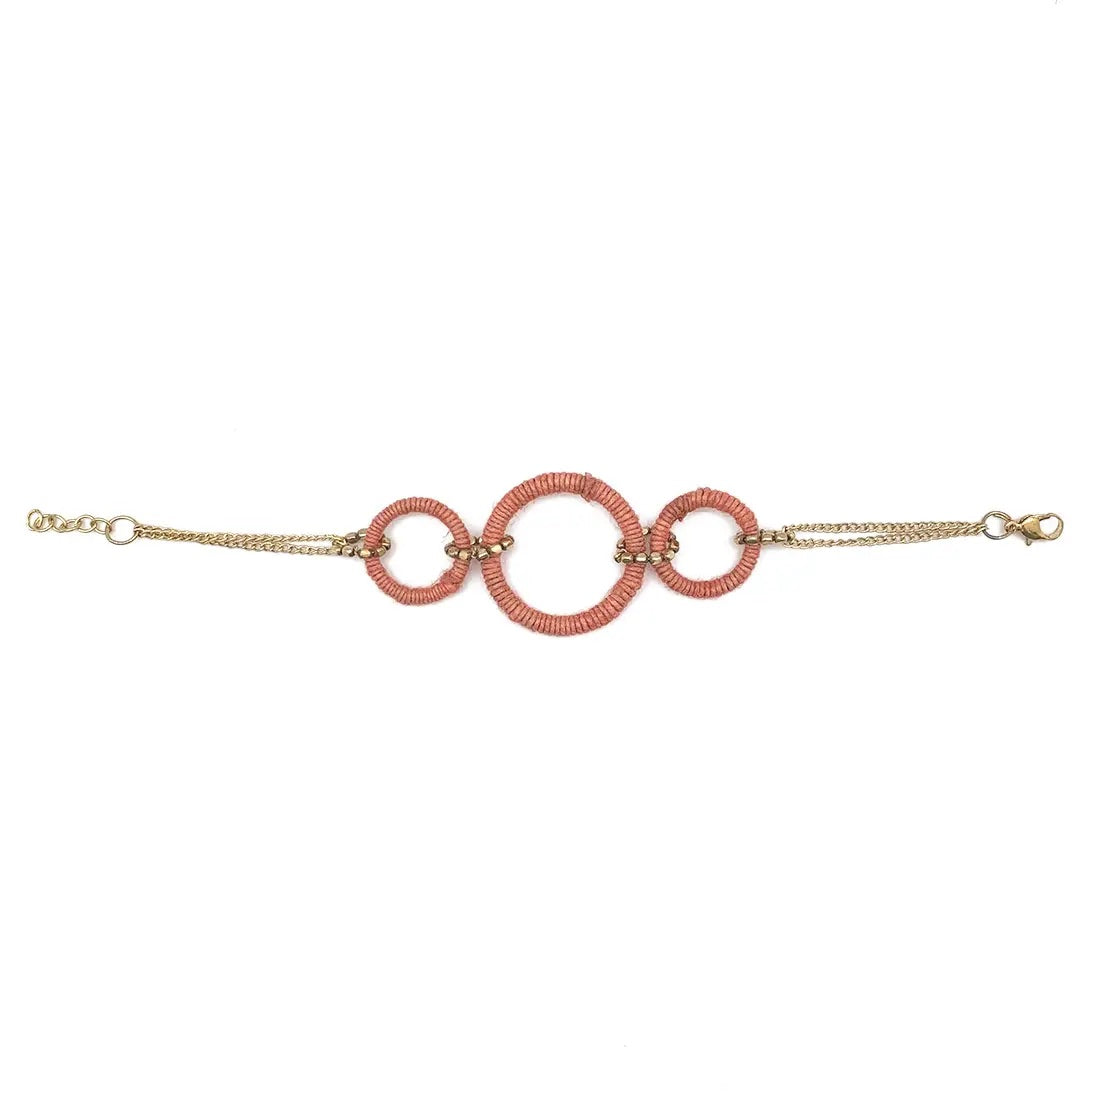 Sachi Terracotta Collection Bracelet - Three Wrapped Rings